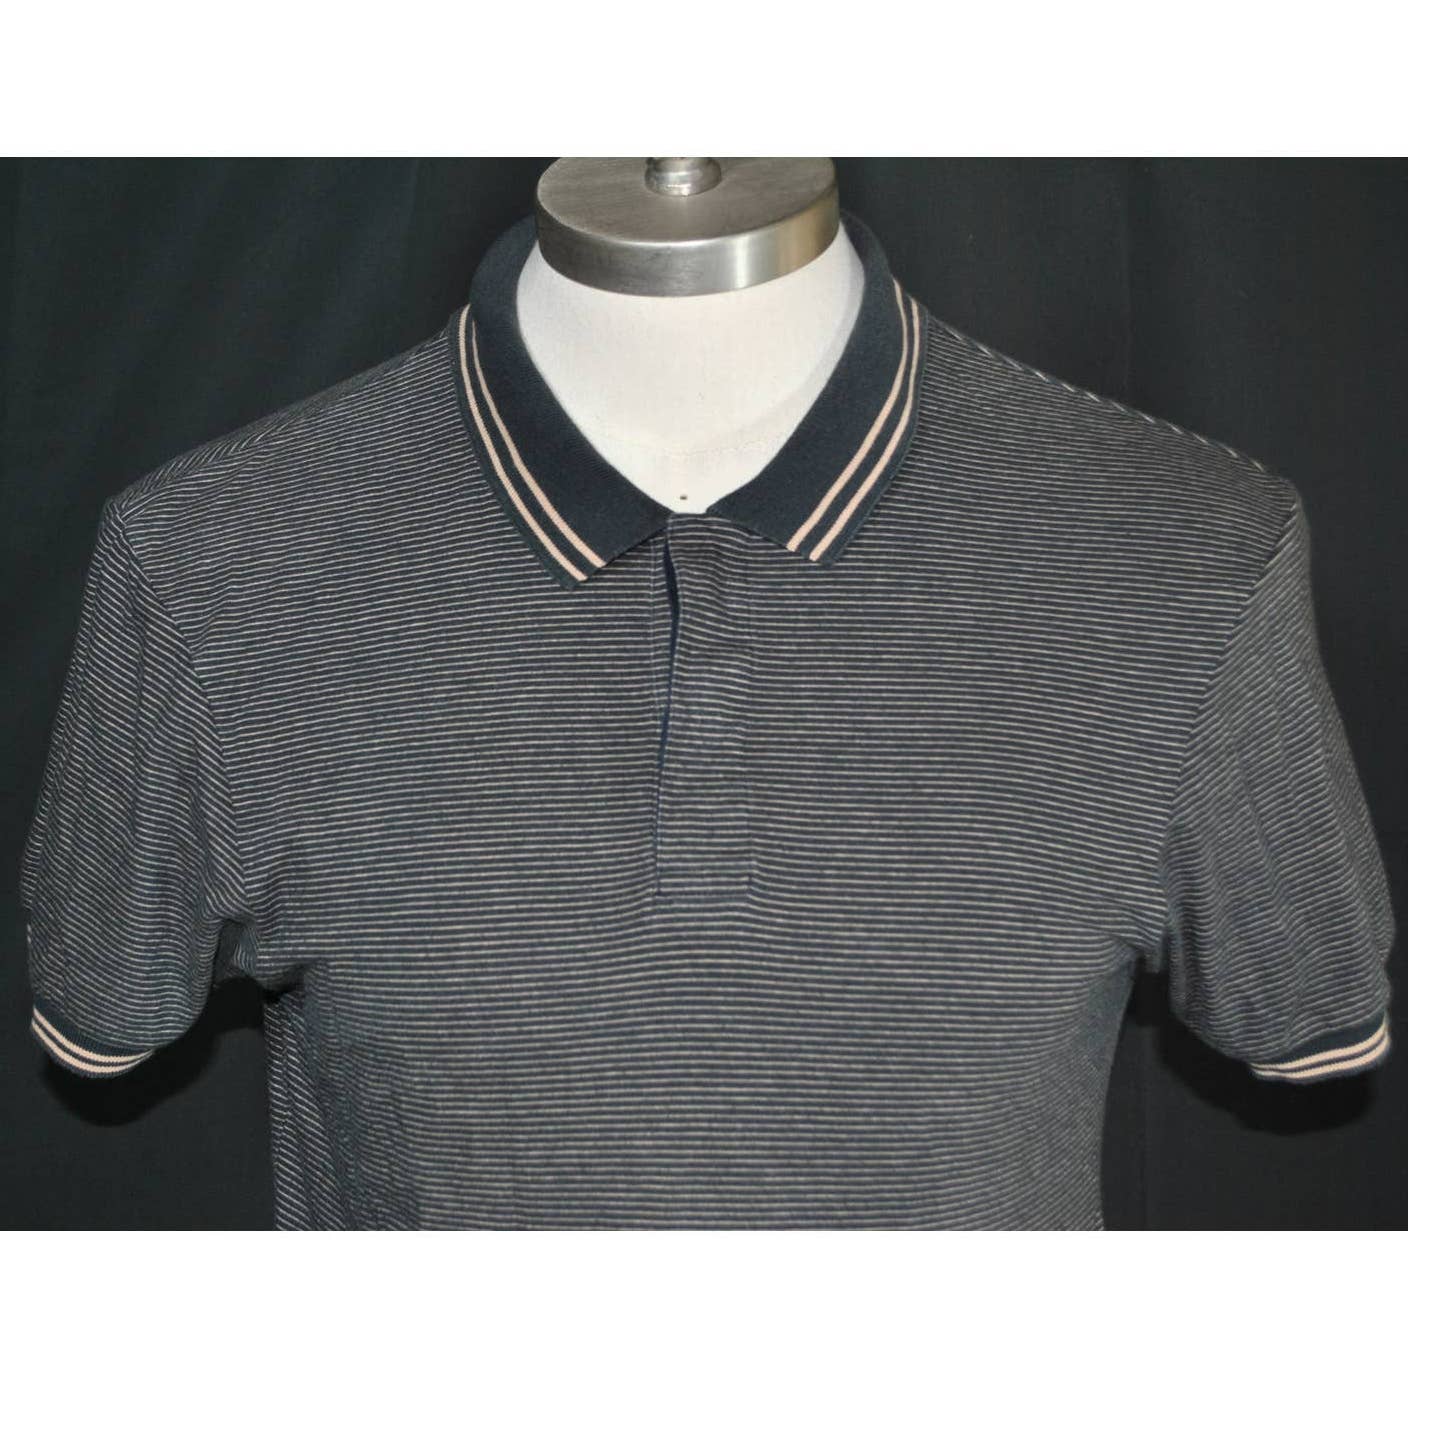 Marc by Marc Jacobs Striped Blue Polo Shirt - M